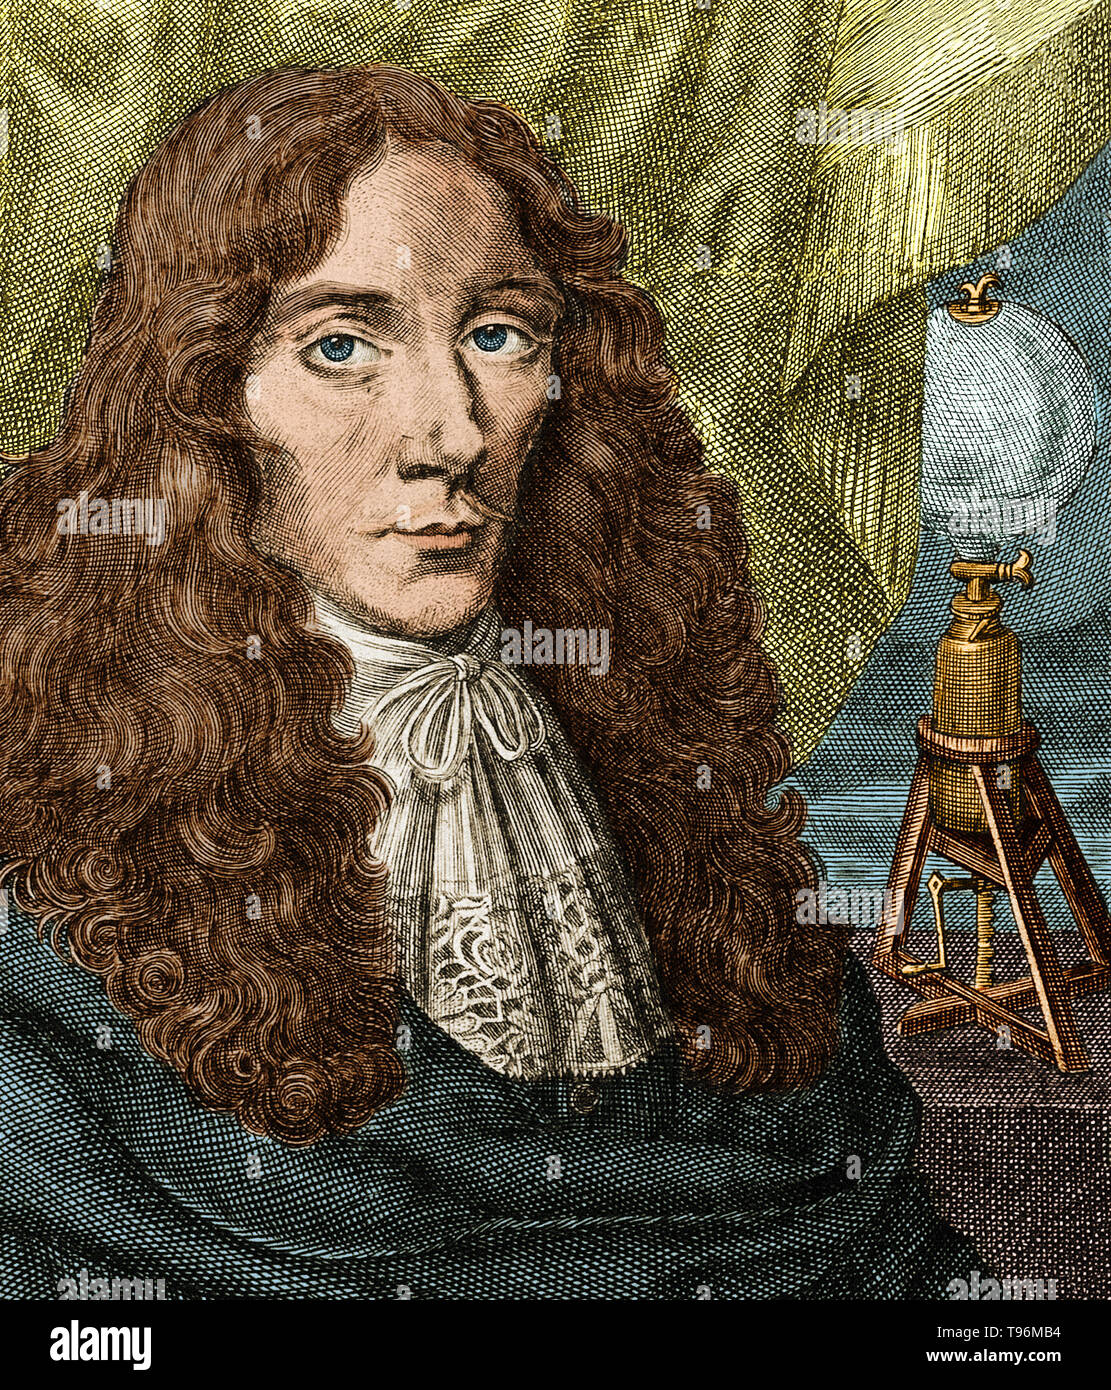 Robert Boyle (1627-1691) was an Irish natural philosopher, chemist, physicist and inventor. He is regarded today as the first modern chemist, and one of the pioneers of modern experimental scientific method. Stock Photo